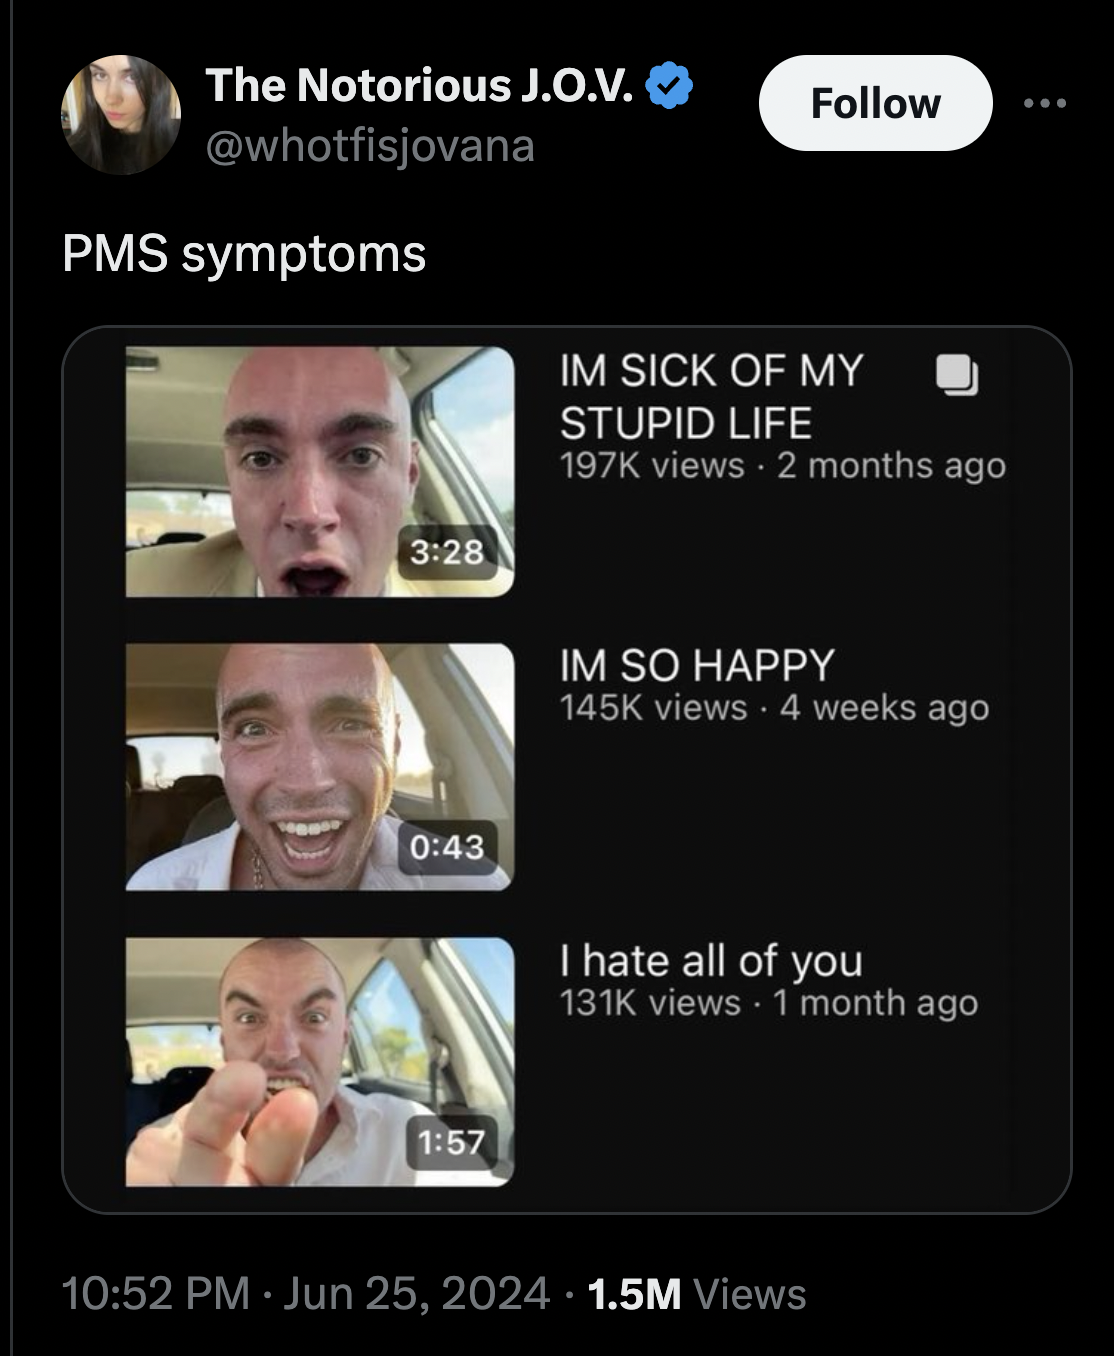 screenshot - The Notorious J.O.V. Pms symptoms Im Sick Of My Stupid Life views 2 months ago Im So Happy views 4 weeks ago I hate all of you views 1 month ago 1.5M Views